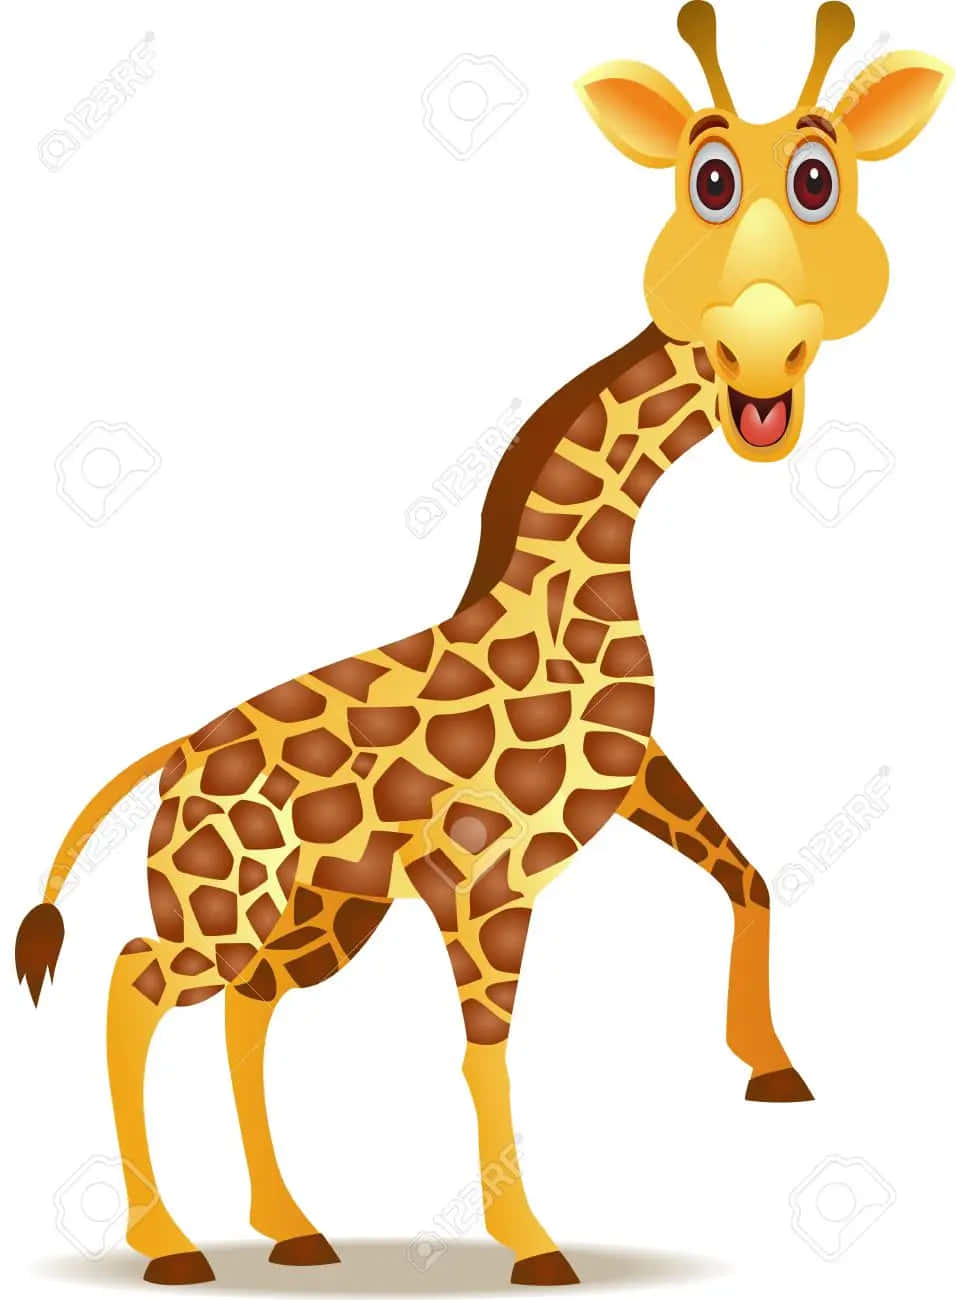 This funny giraffe can't hide his joy!